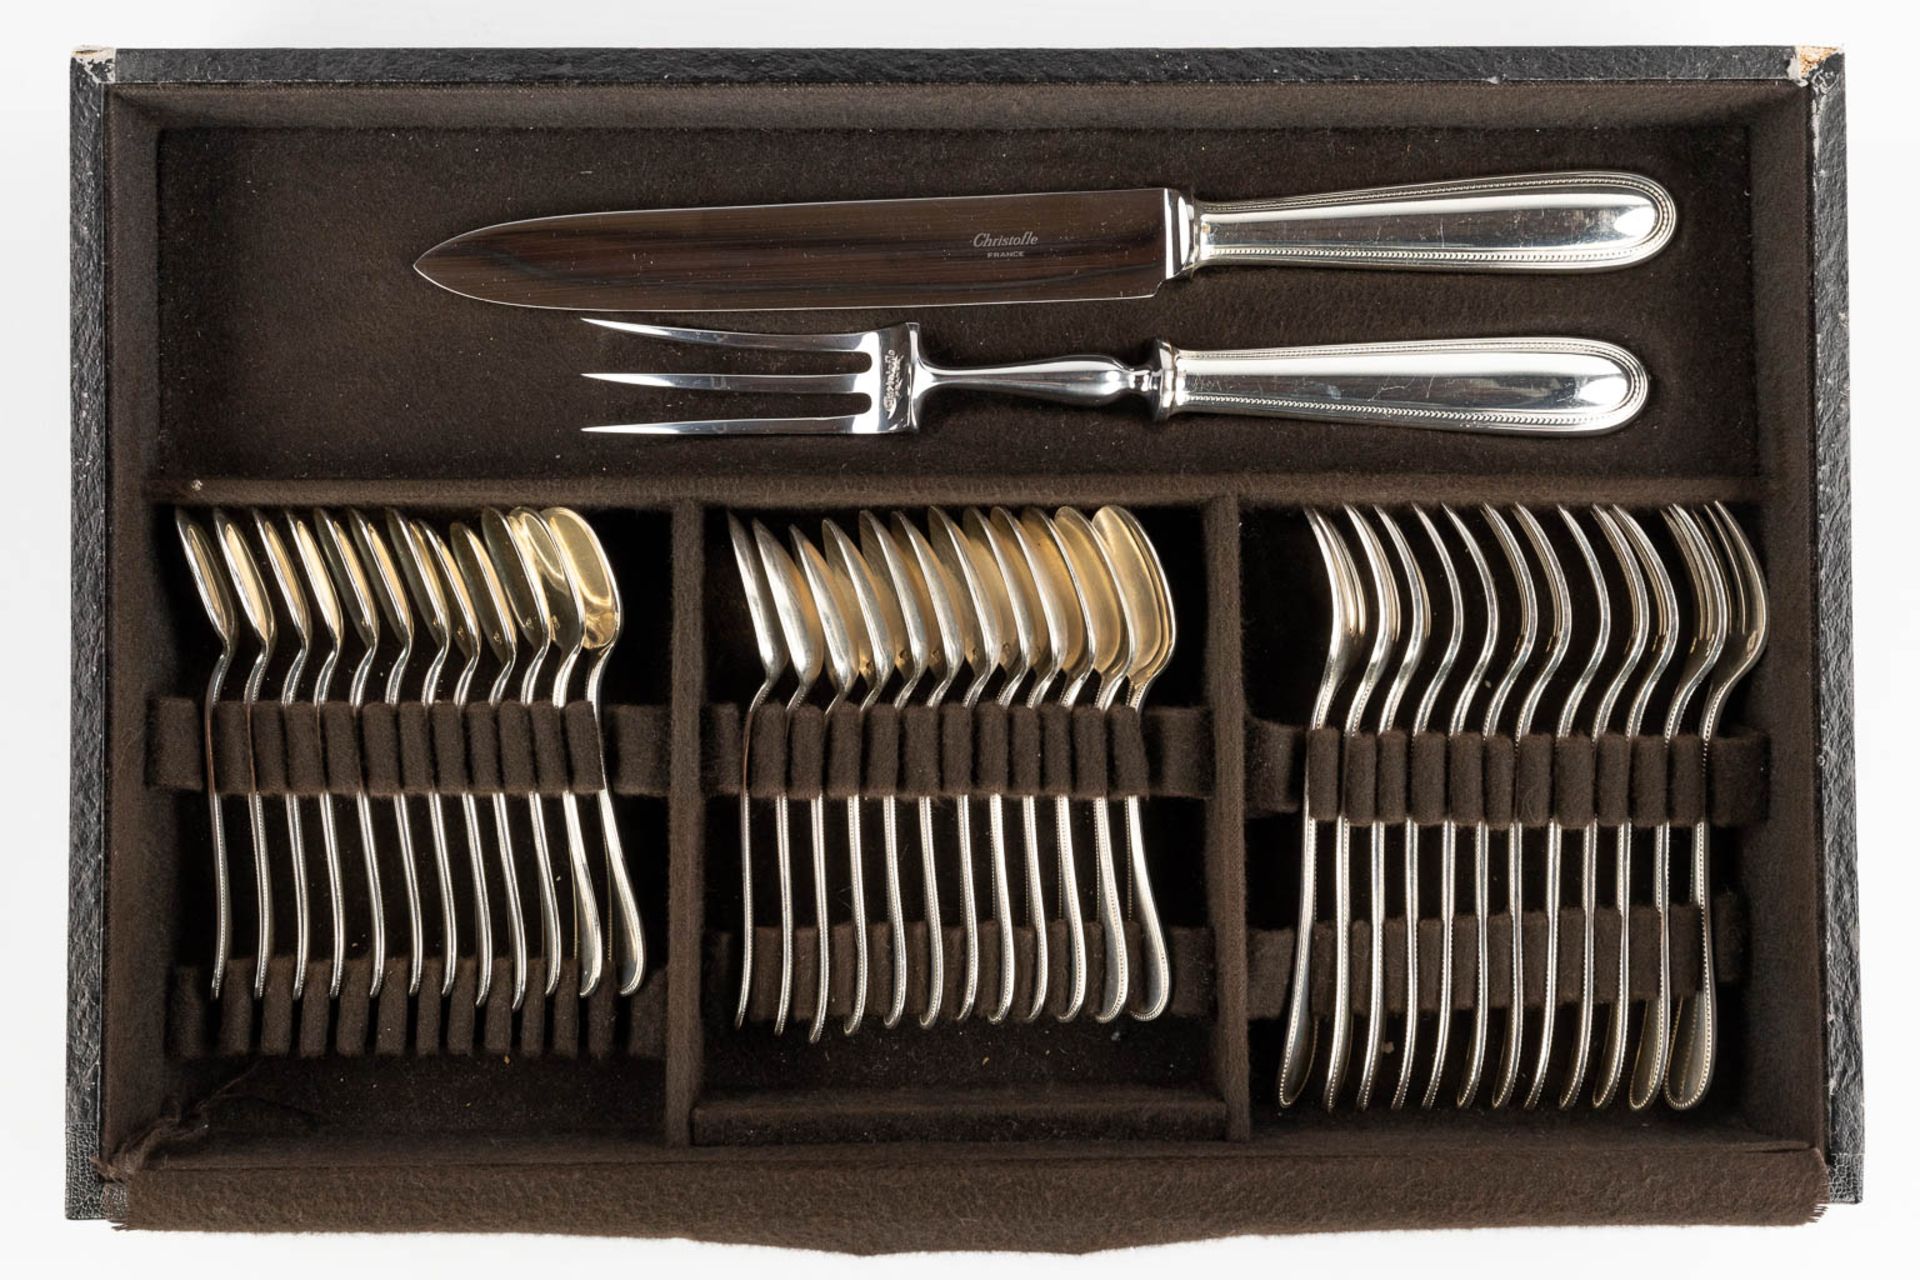 Christofle 'Perles' a large silver-plated cutlery in a storage box. 144 pieces. (D:29 x W:46 x H:33 - Image 20 of 21